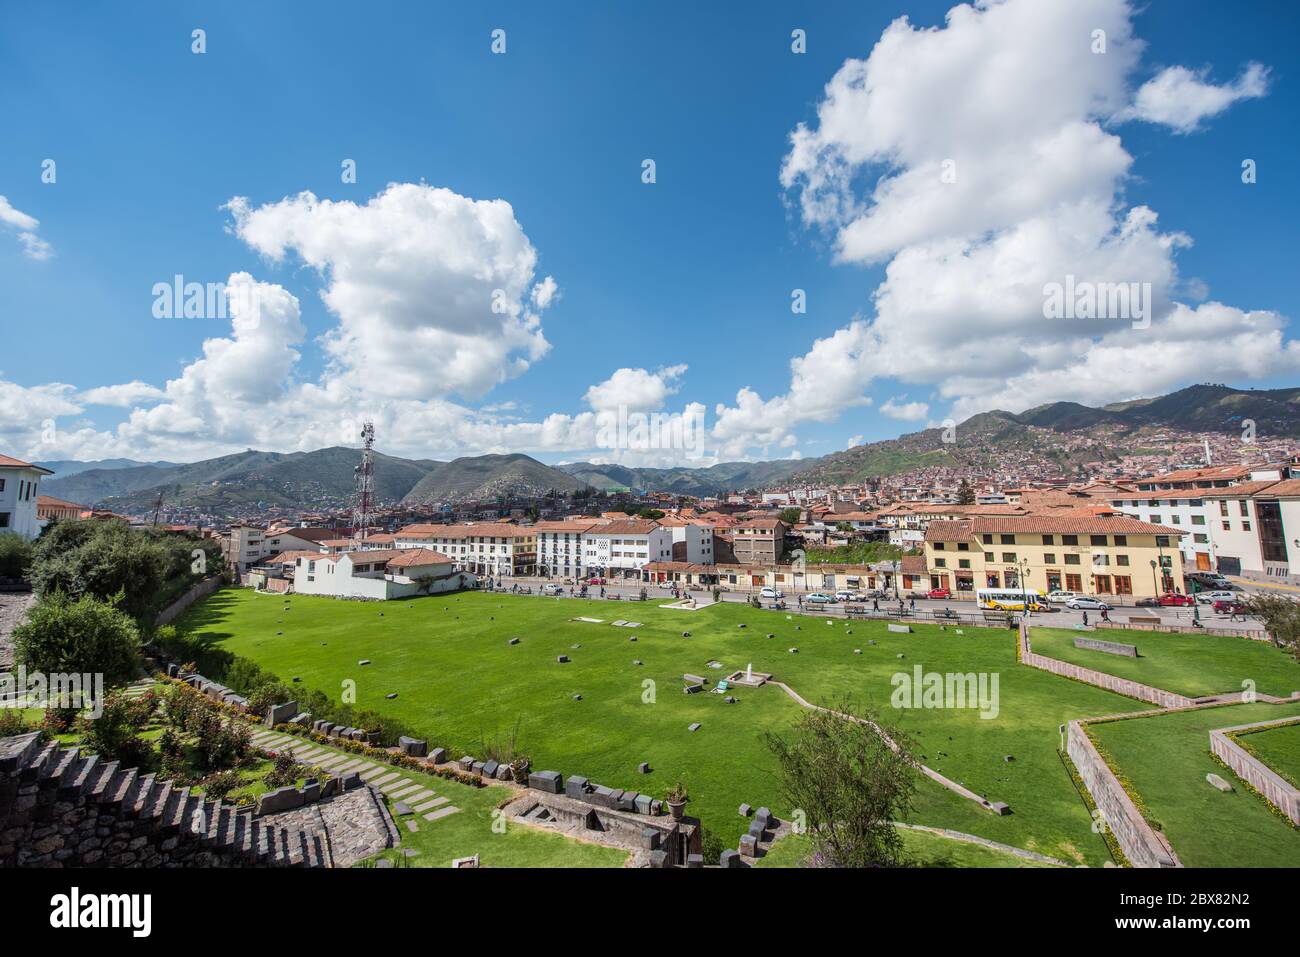 Cityscape of Cusco Old City as seen from the Incan Sun Temple Coricancha, Stock Photo